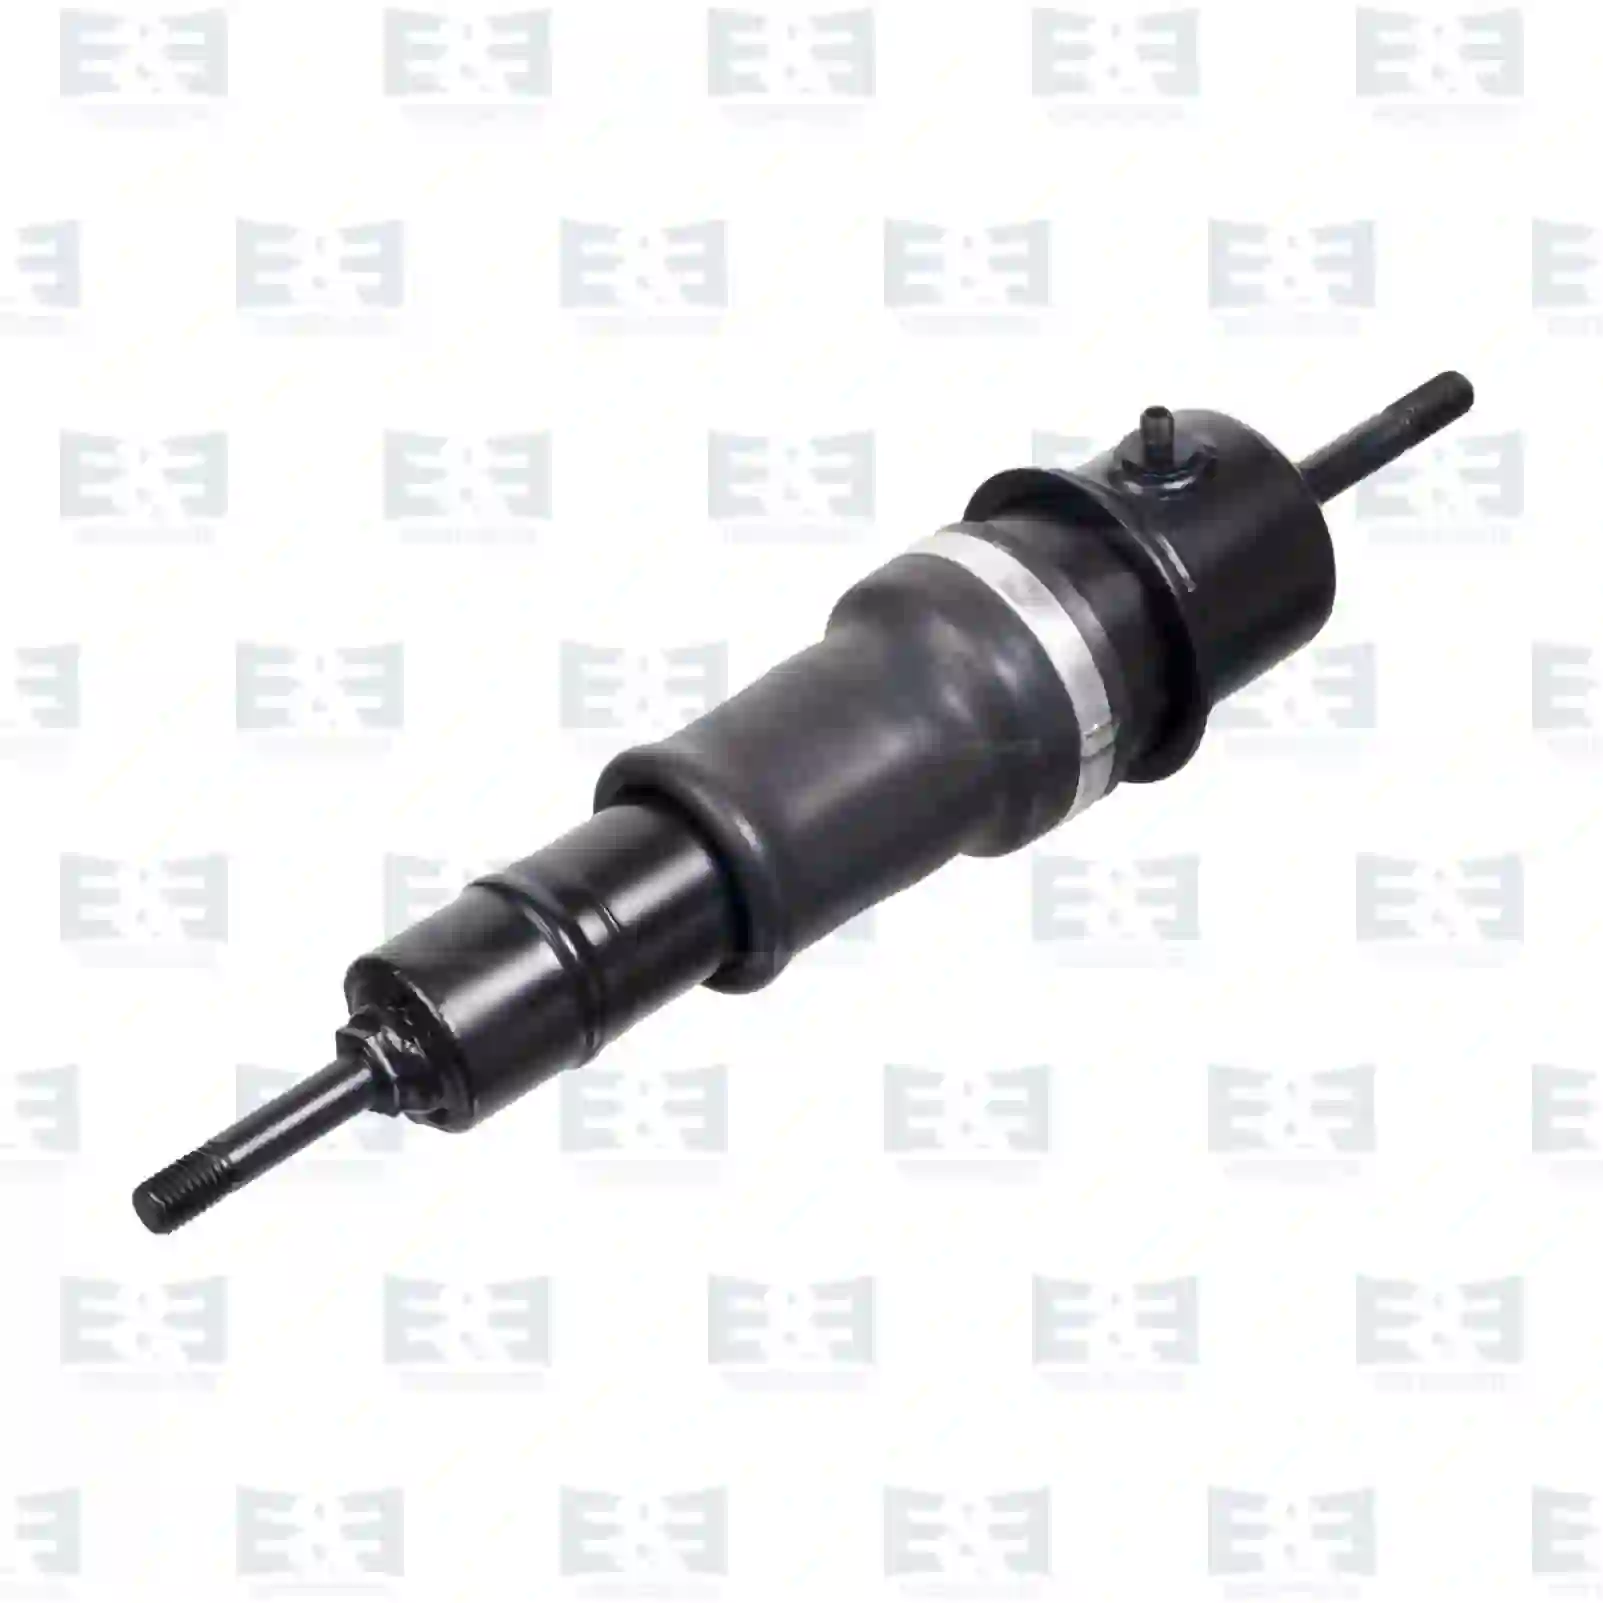  Cabin shock absorber || E&E Truck Spare Parts | Truck Spare Parts, Auotomotive Spare Parts